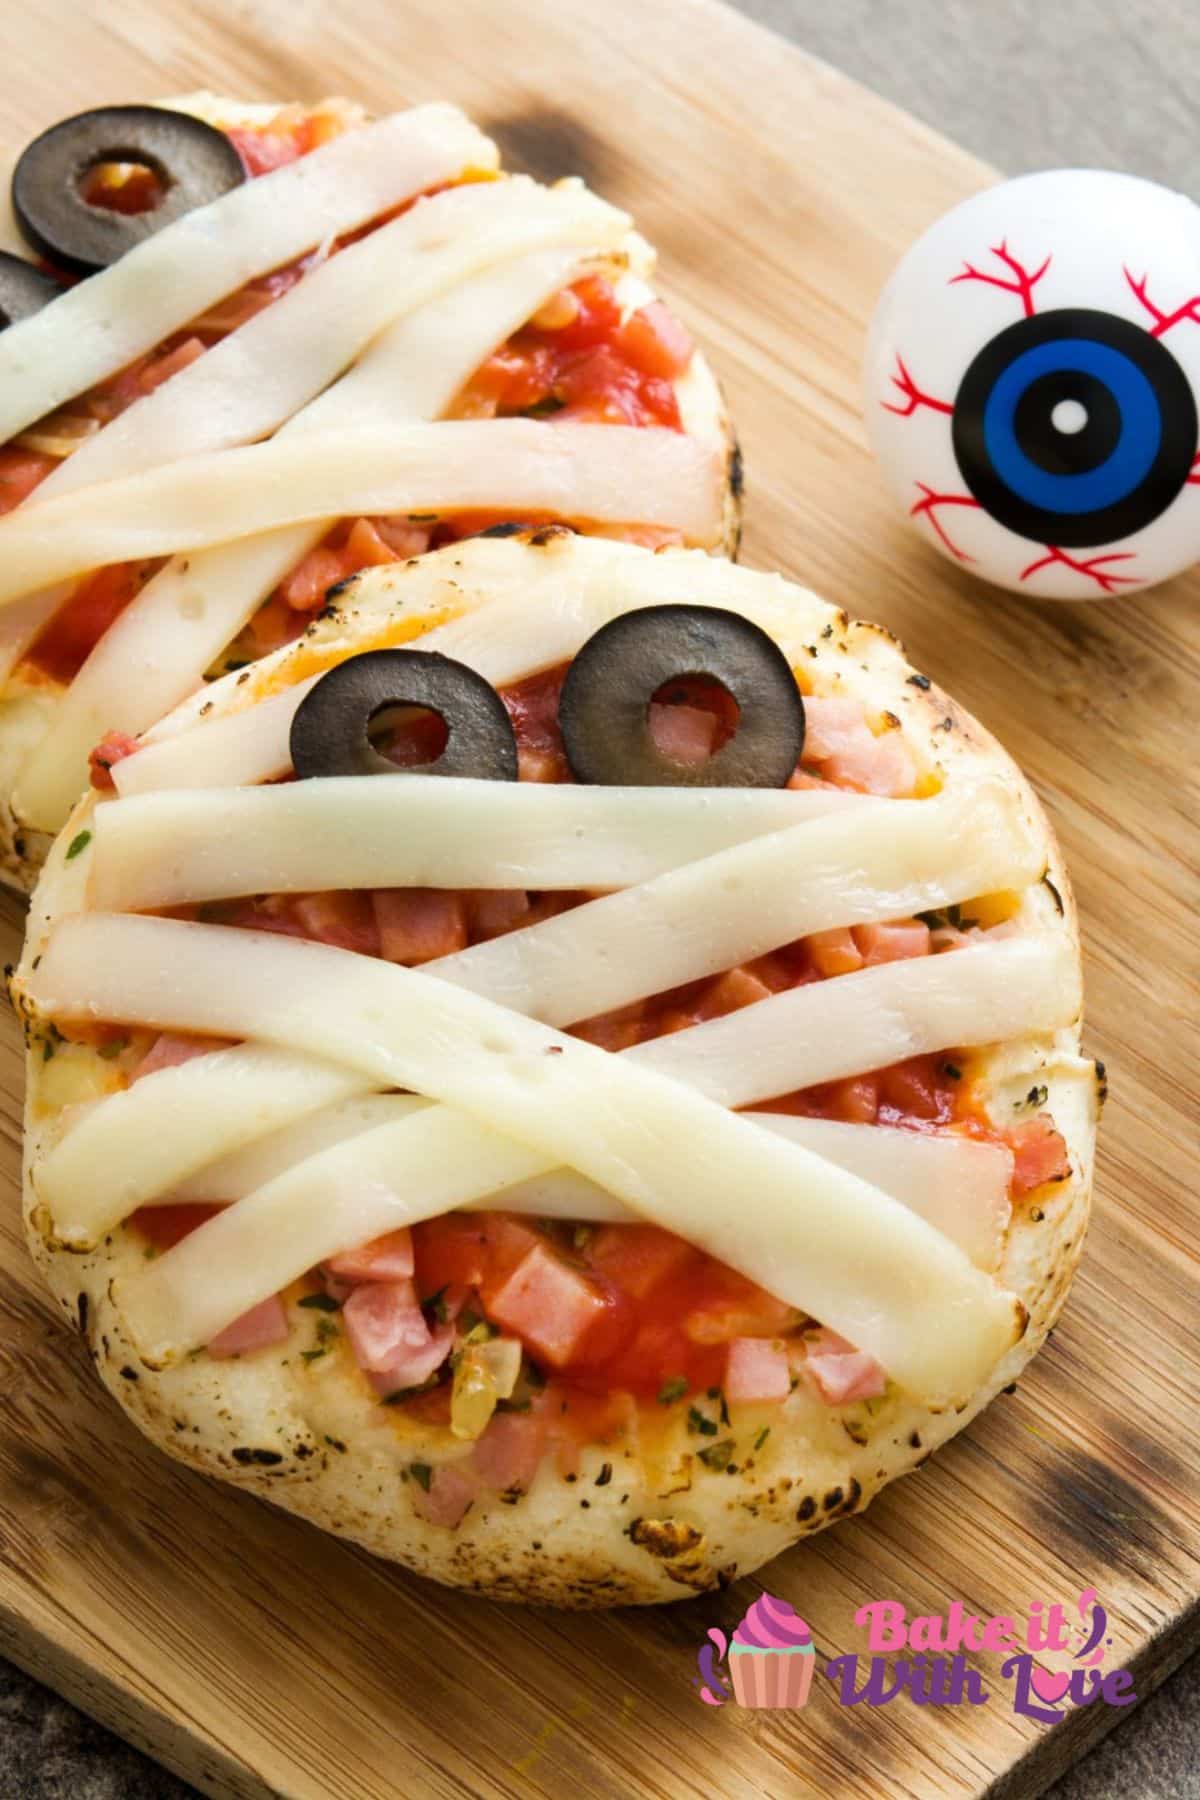 Easy to make mini mummy pizzas using English muffins, mozzarella strips, and sliced olives.